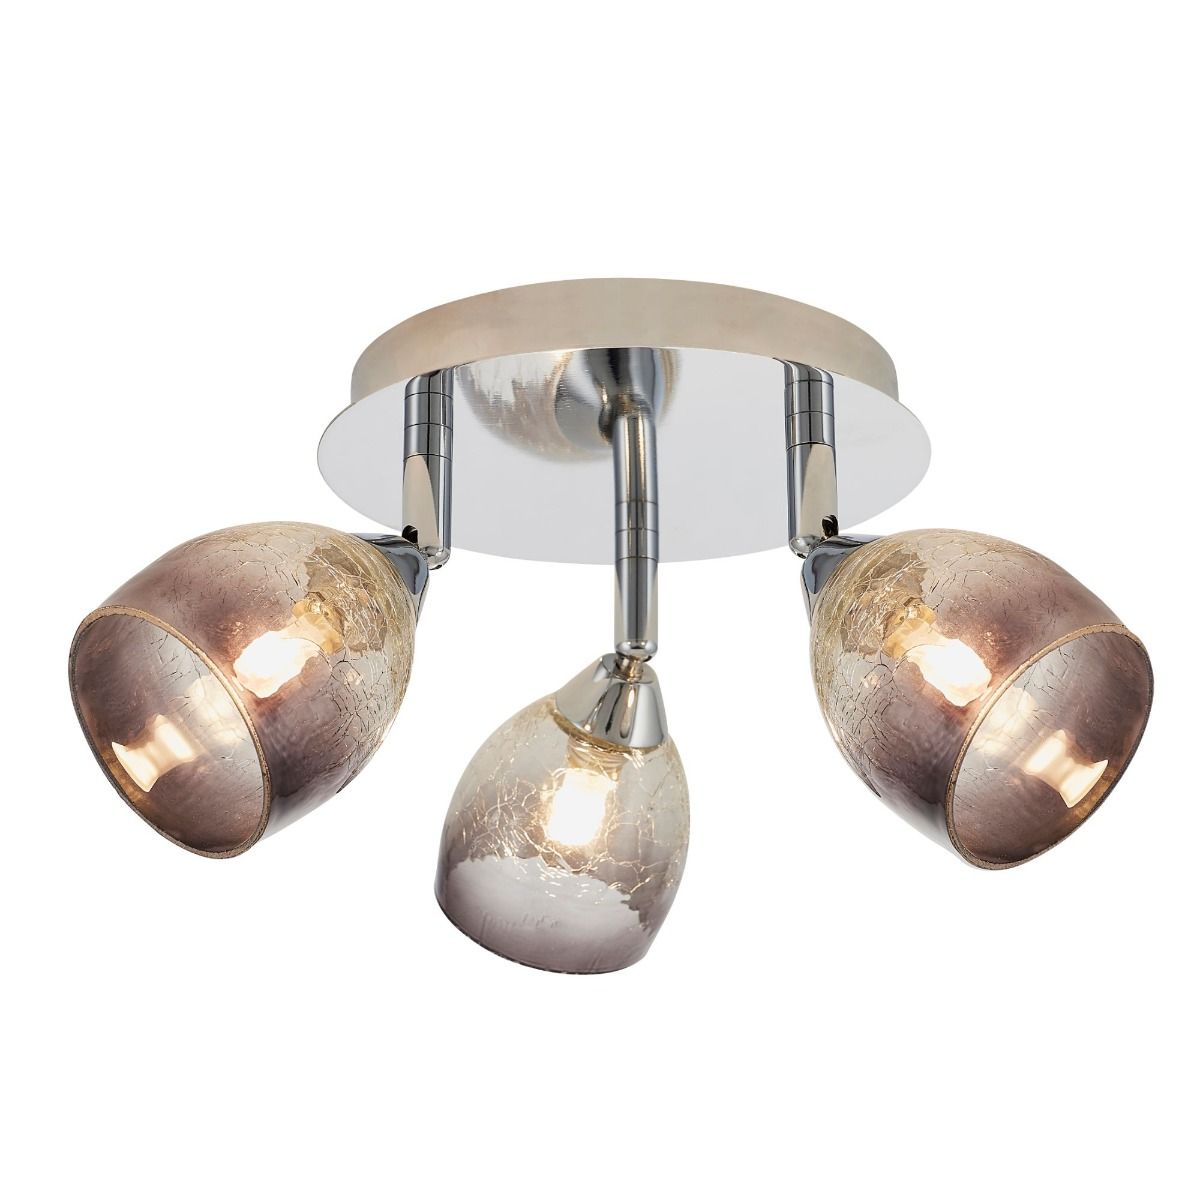 Colby 3 Light Spot Plate Polished Chrome And Smoked Glass Flush Ceiling Light